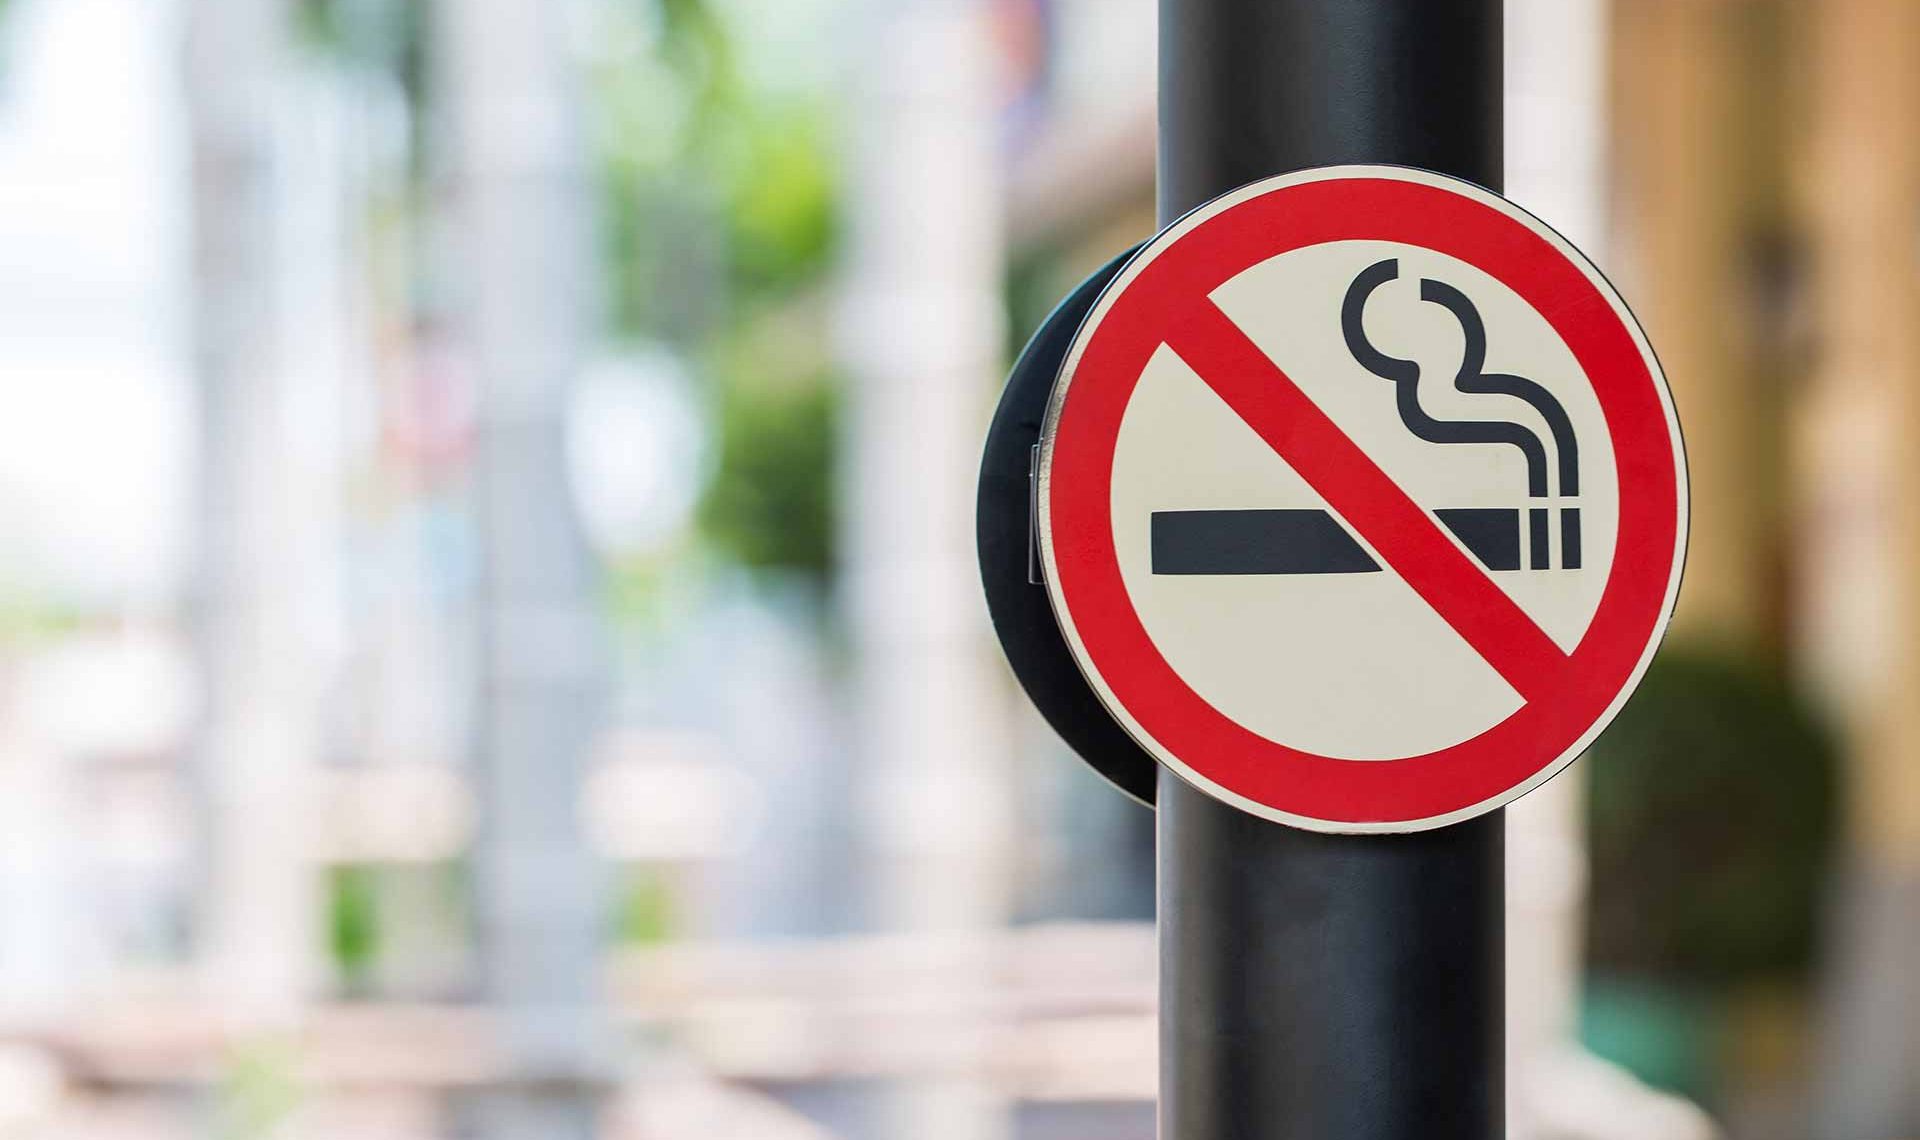 Lincolnshire hospitals looking to be smoke free by 2020